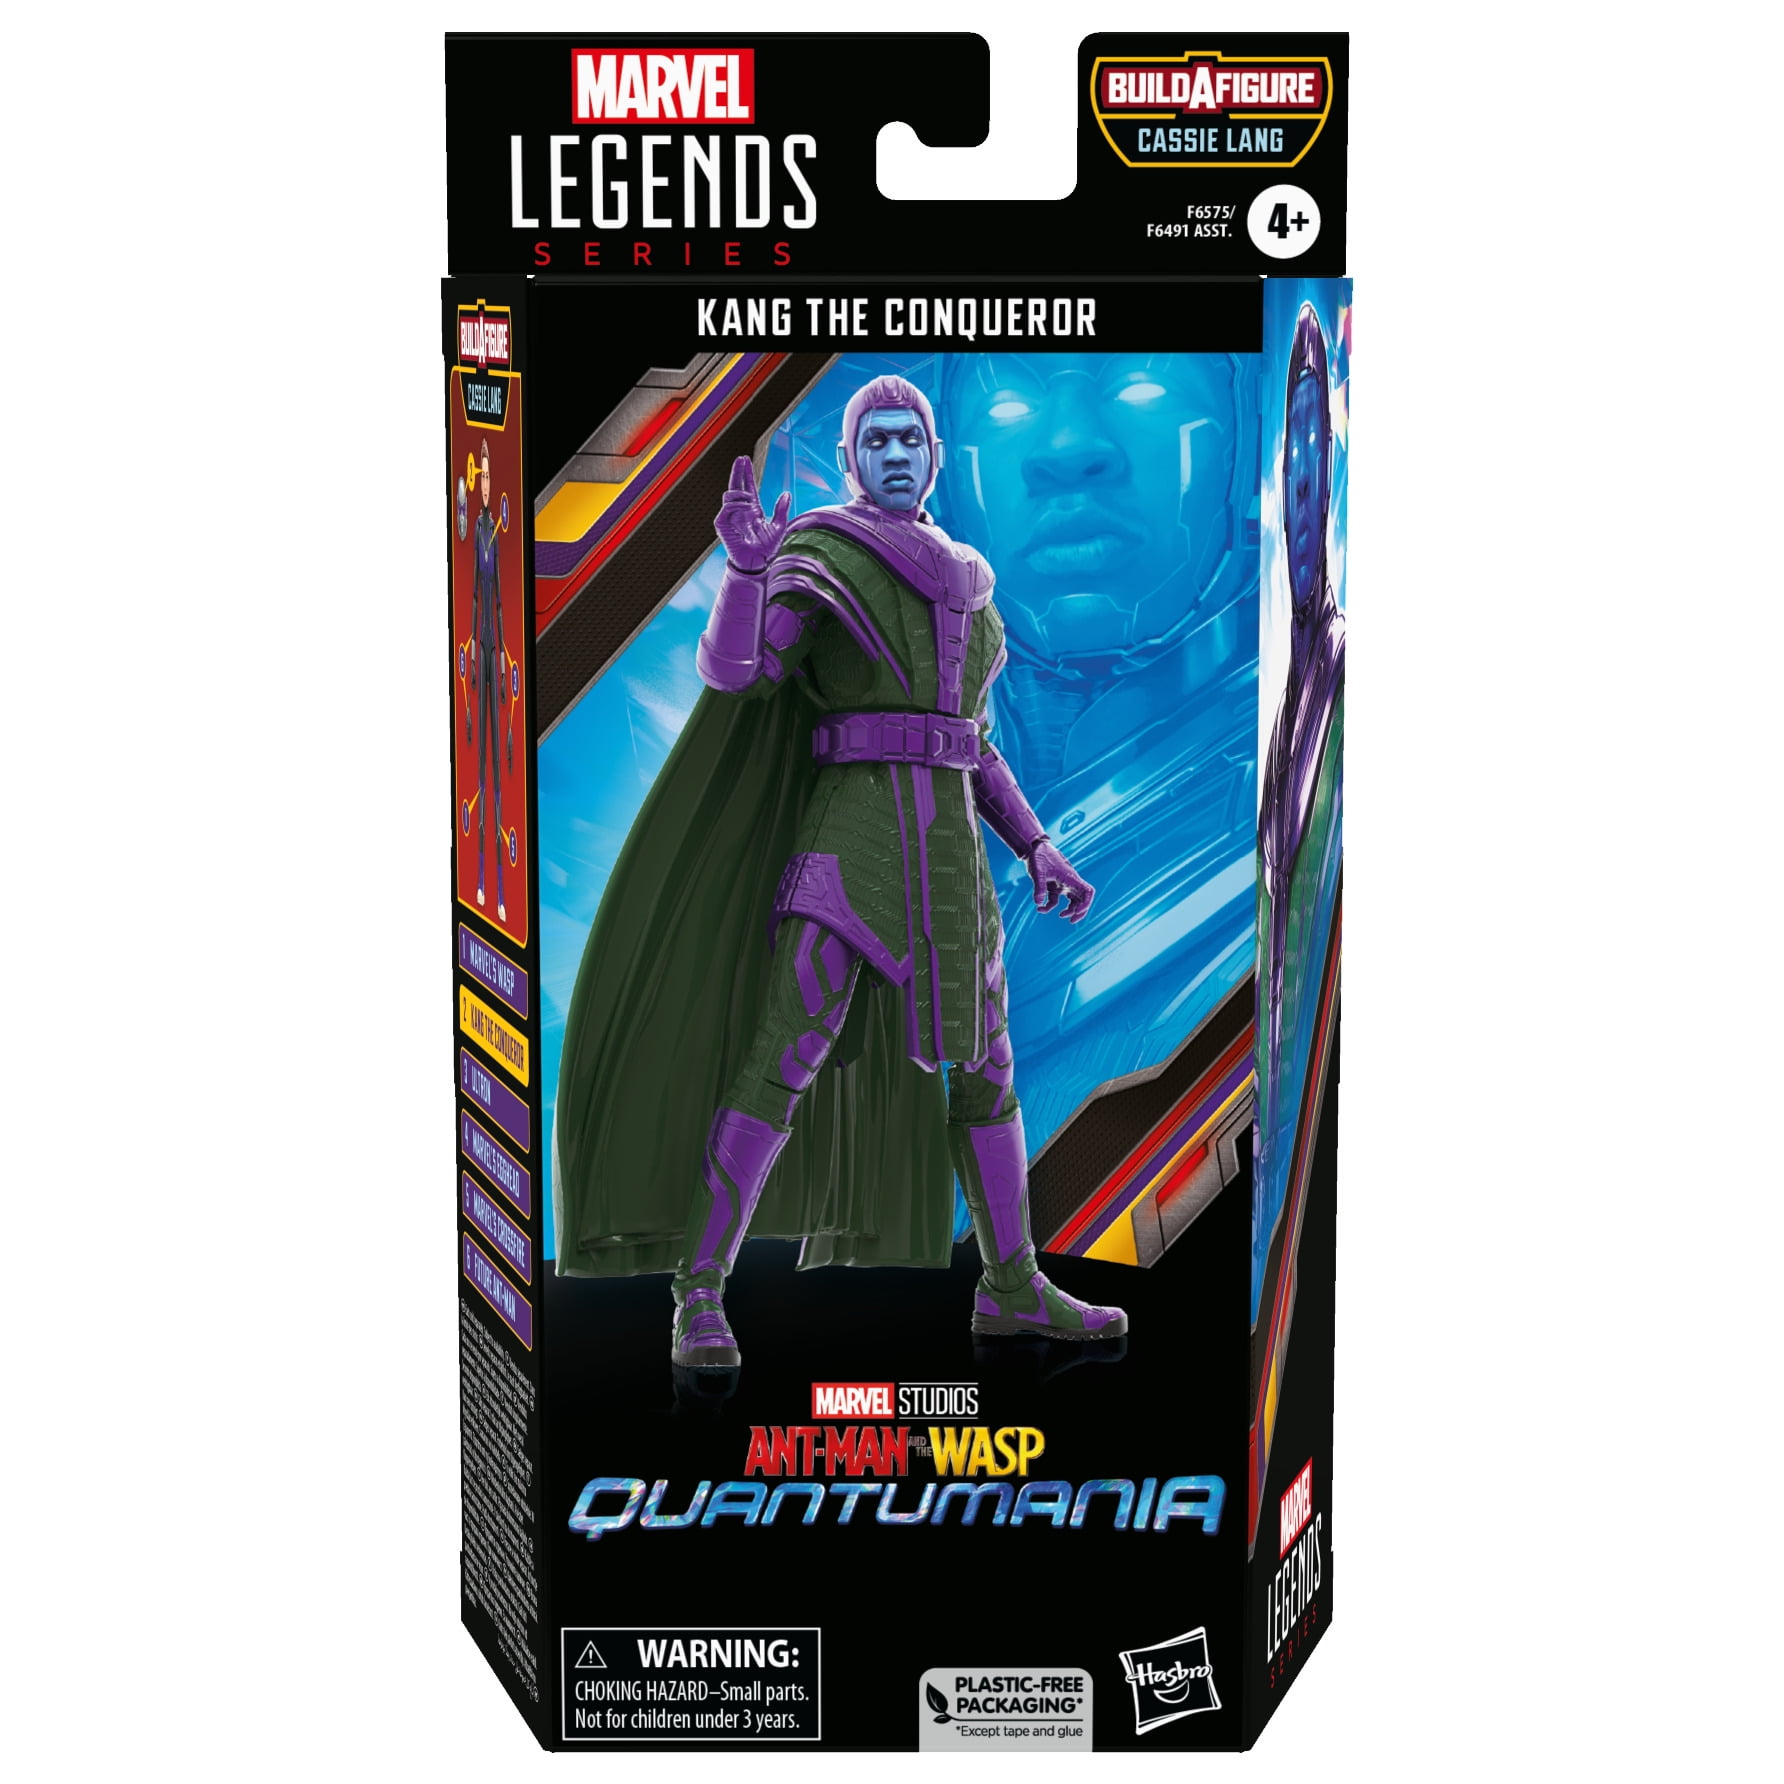 Marvel Legends Series Kang the Conqueror Action Figures (6”)